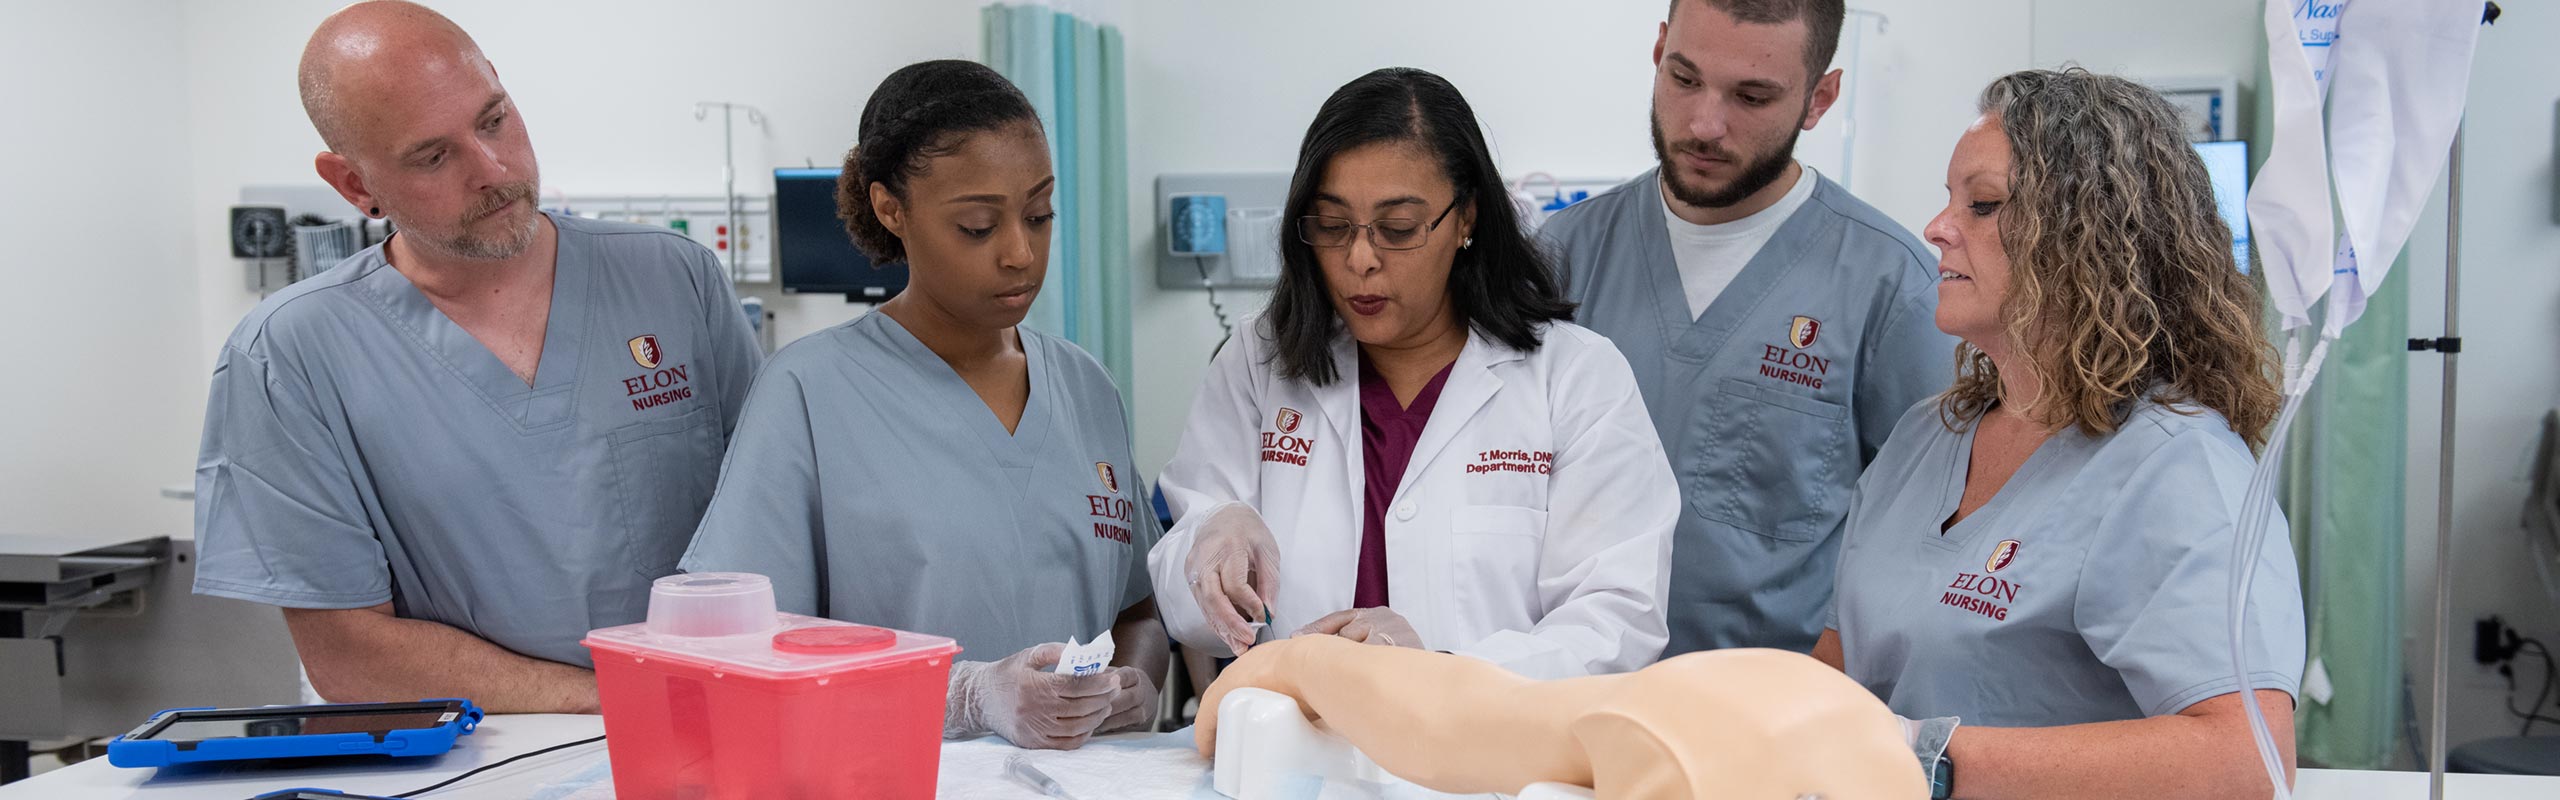 A professor showing four nursing students how to perform a medical procedure.